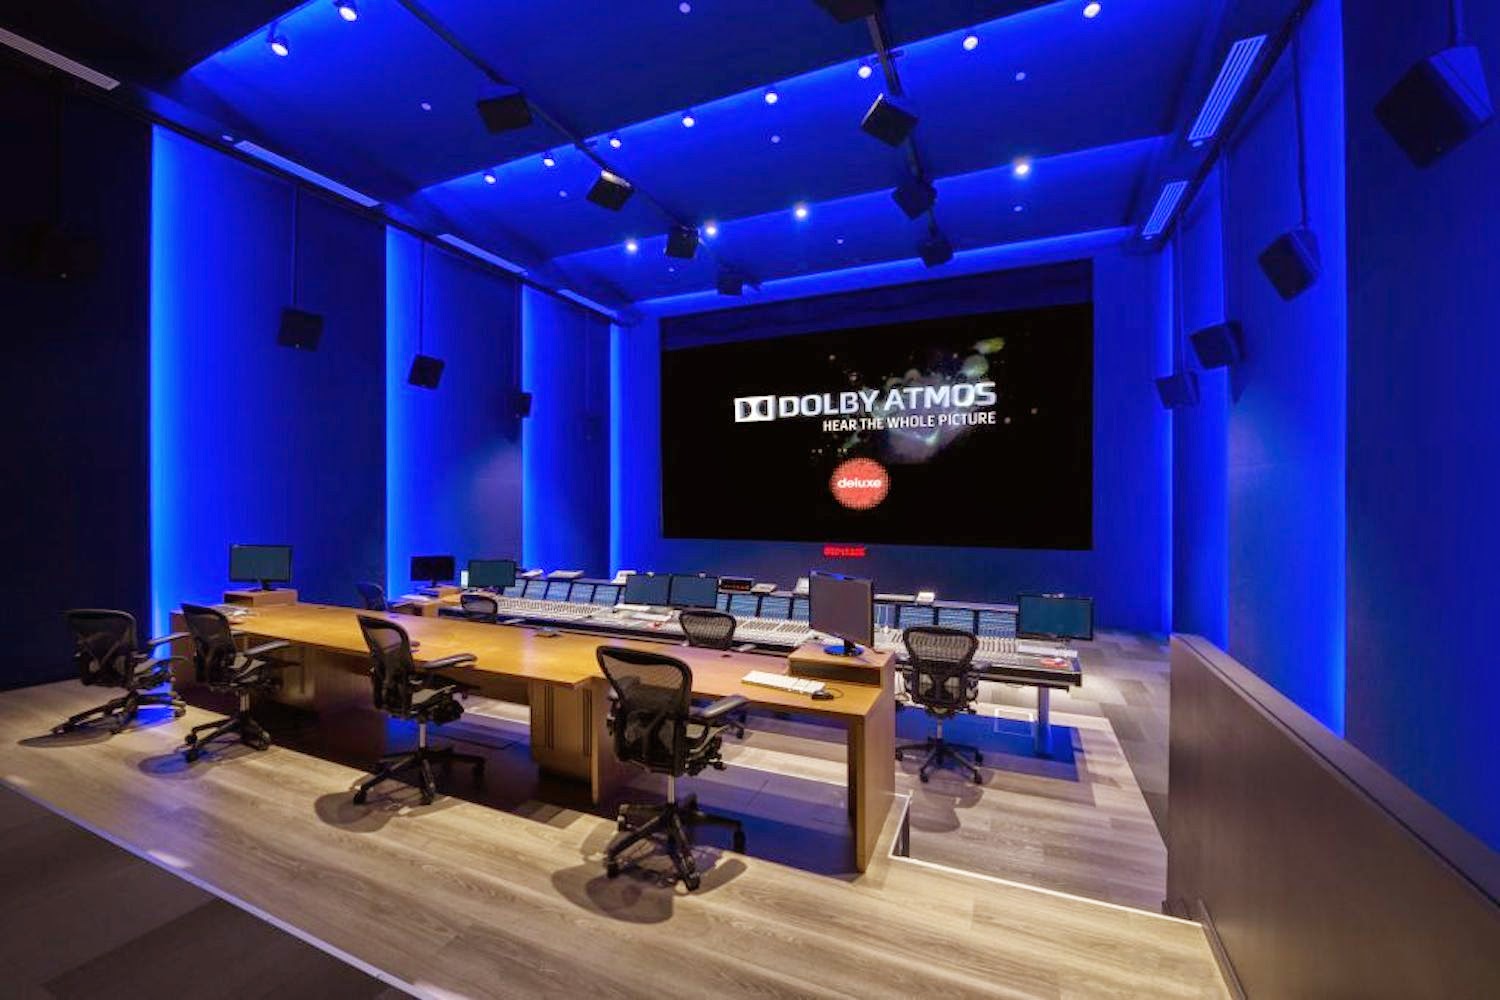 Deluxe Toronto Demonstrates Commitment to World-Class Quality, Outfits New Facility with JBL M2 Master Reference Monitors, Crown Amplifiers and BSS Audio Processing